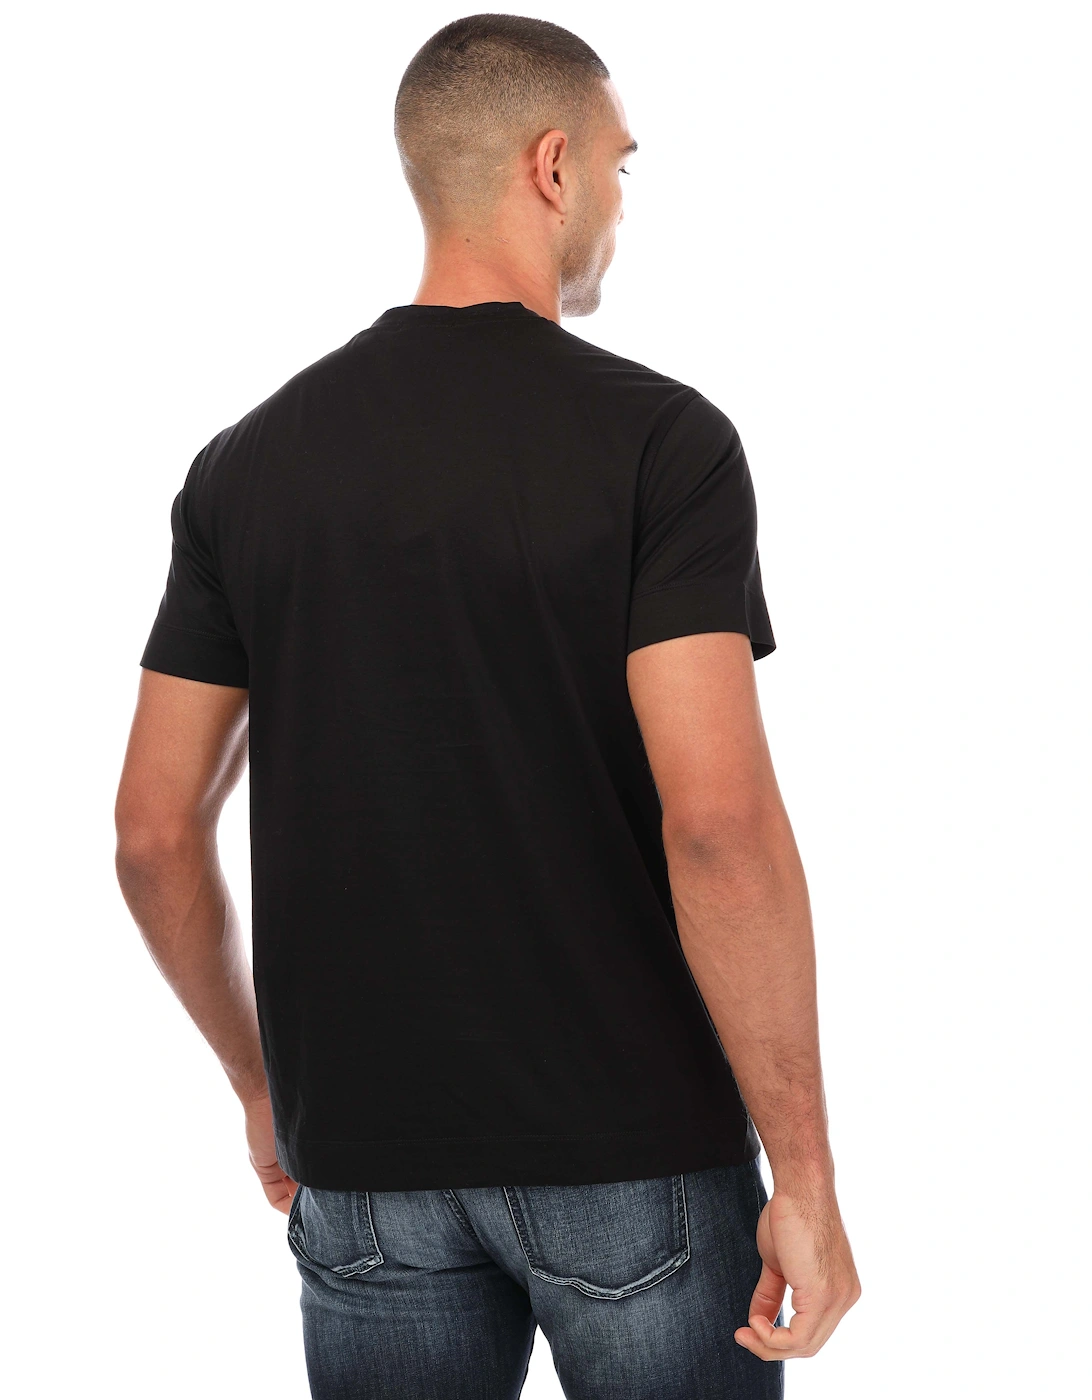 Mens Embroidered Logo T-Shirt